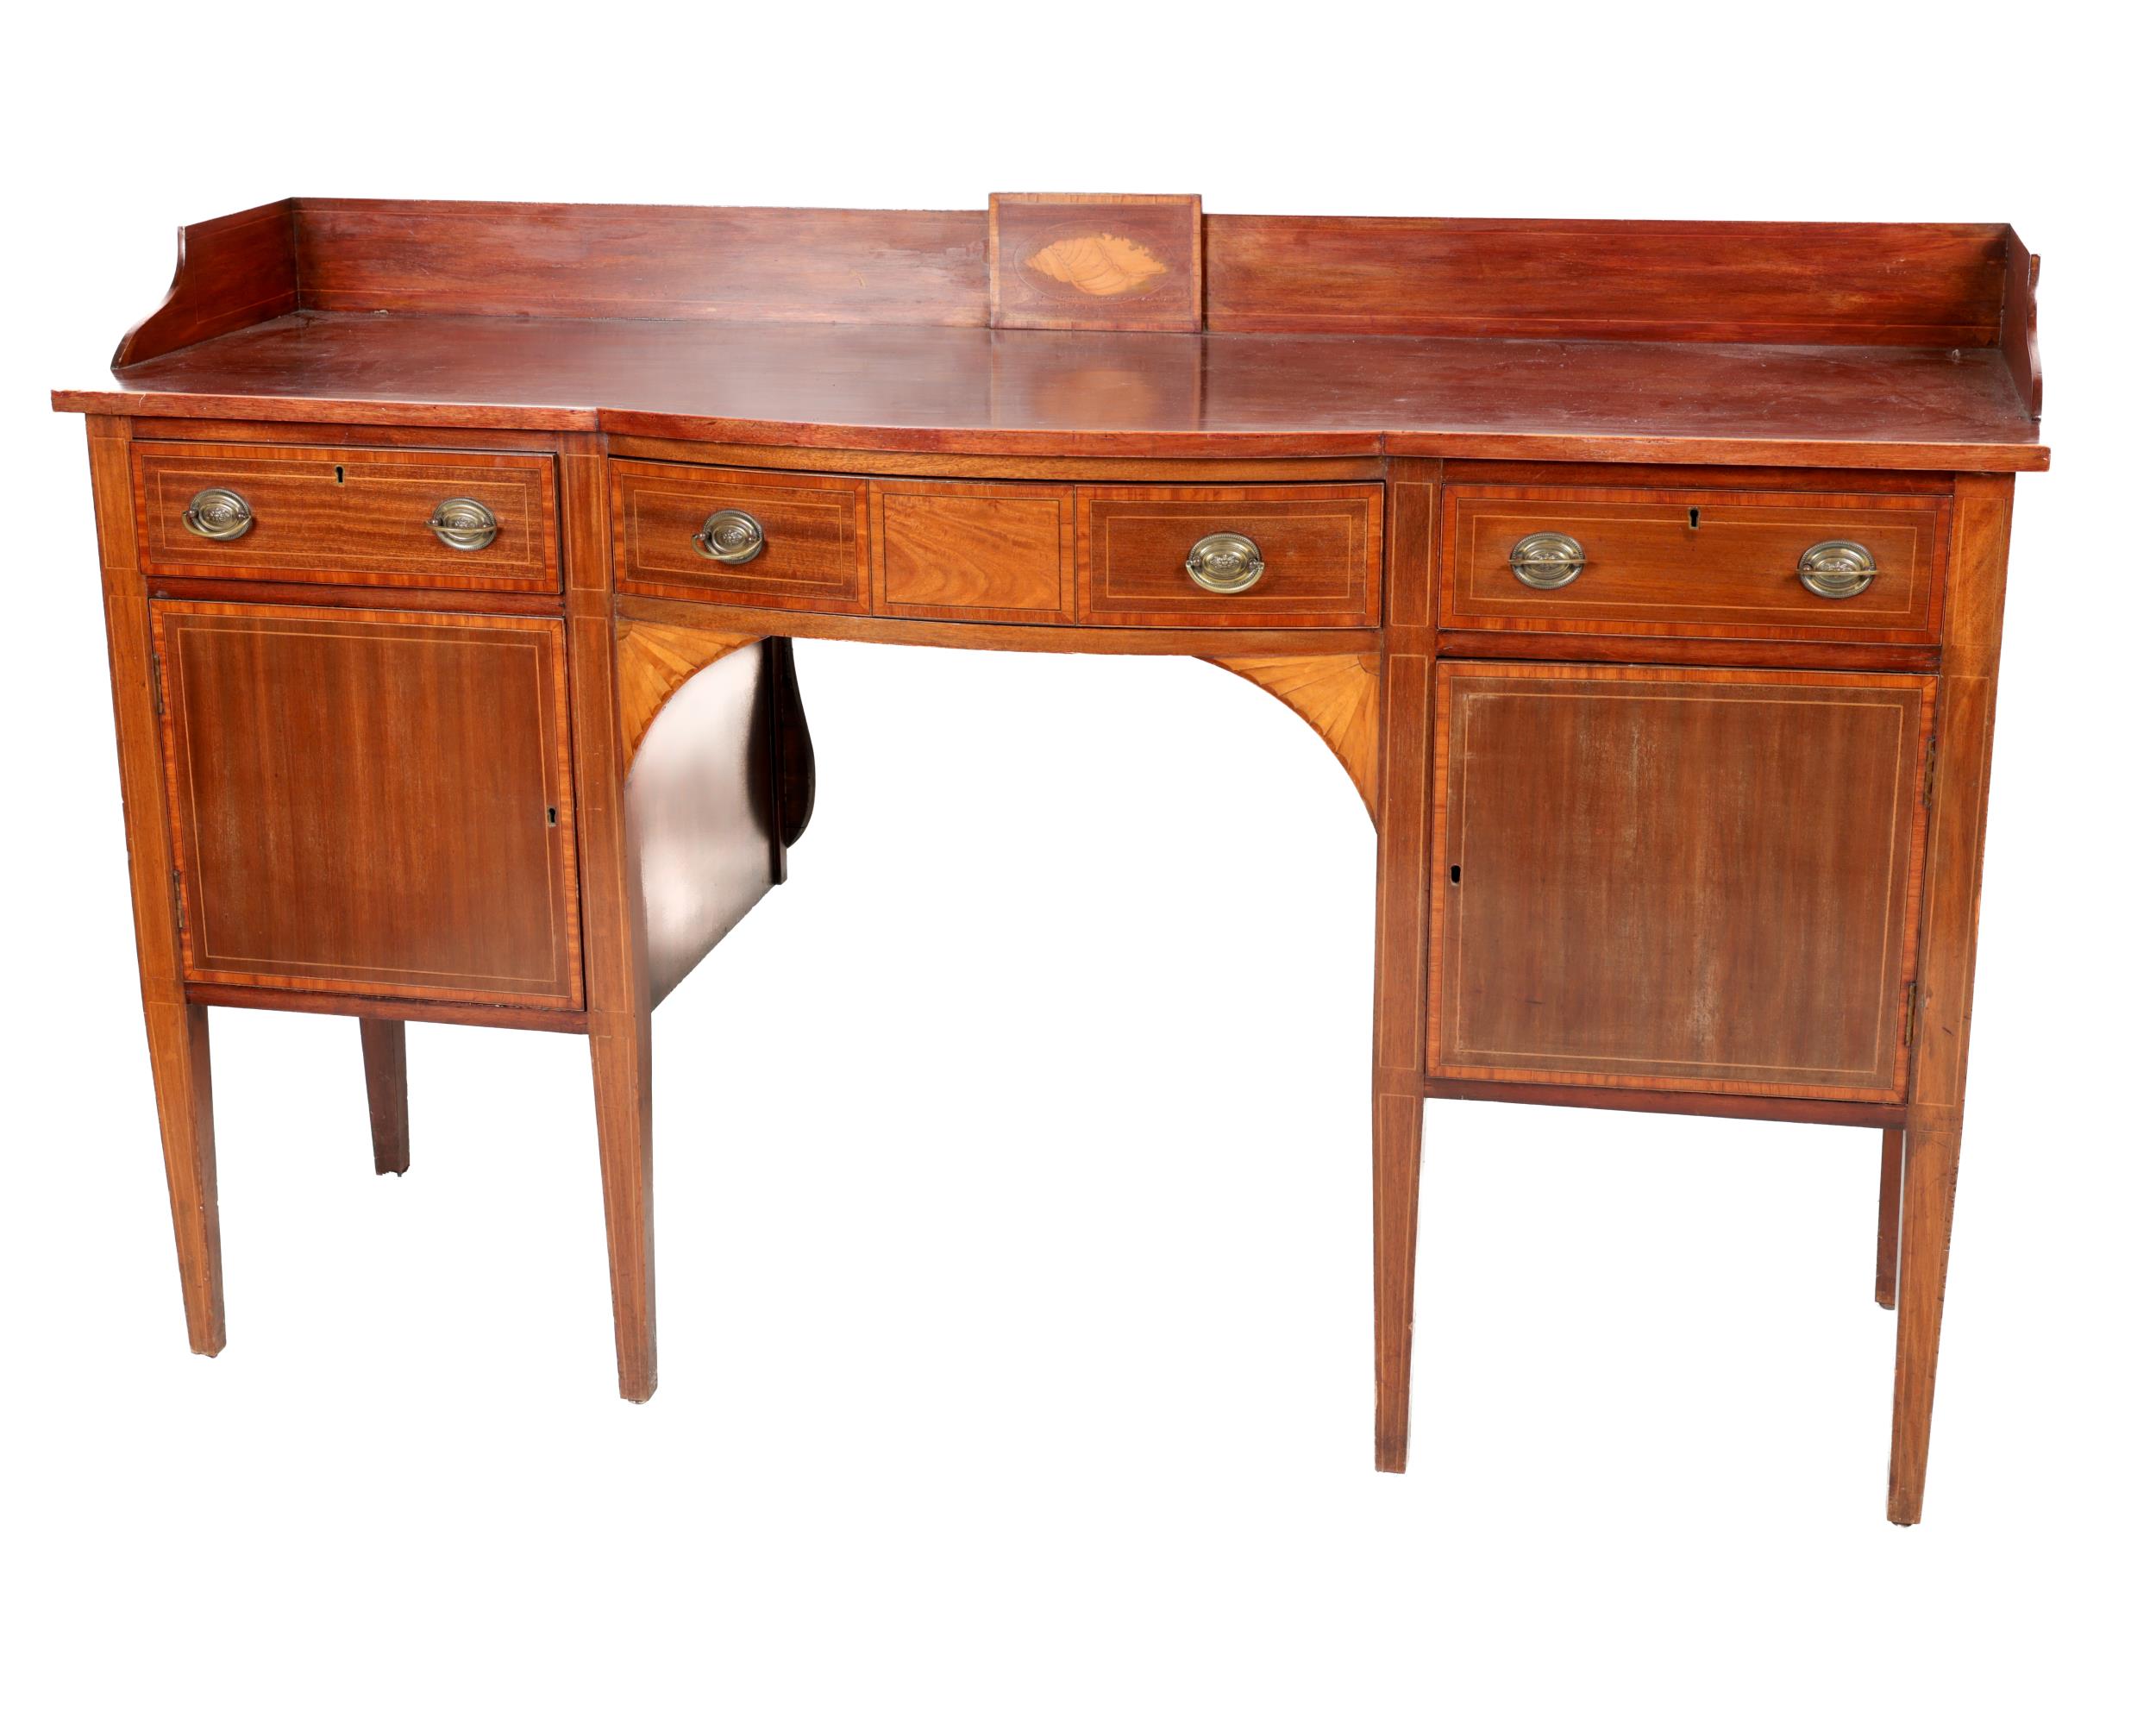 A 19th Century mahogany bow fronted Sideboard, with gallery back and inlaid shell decorated